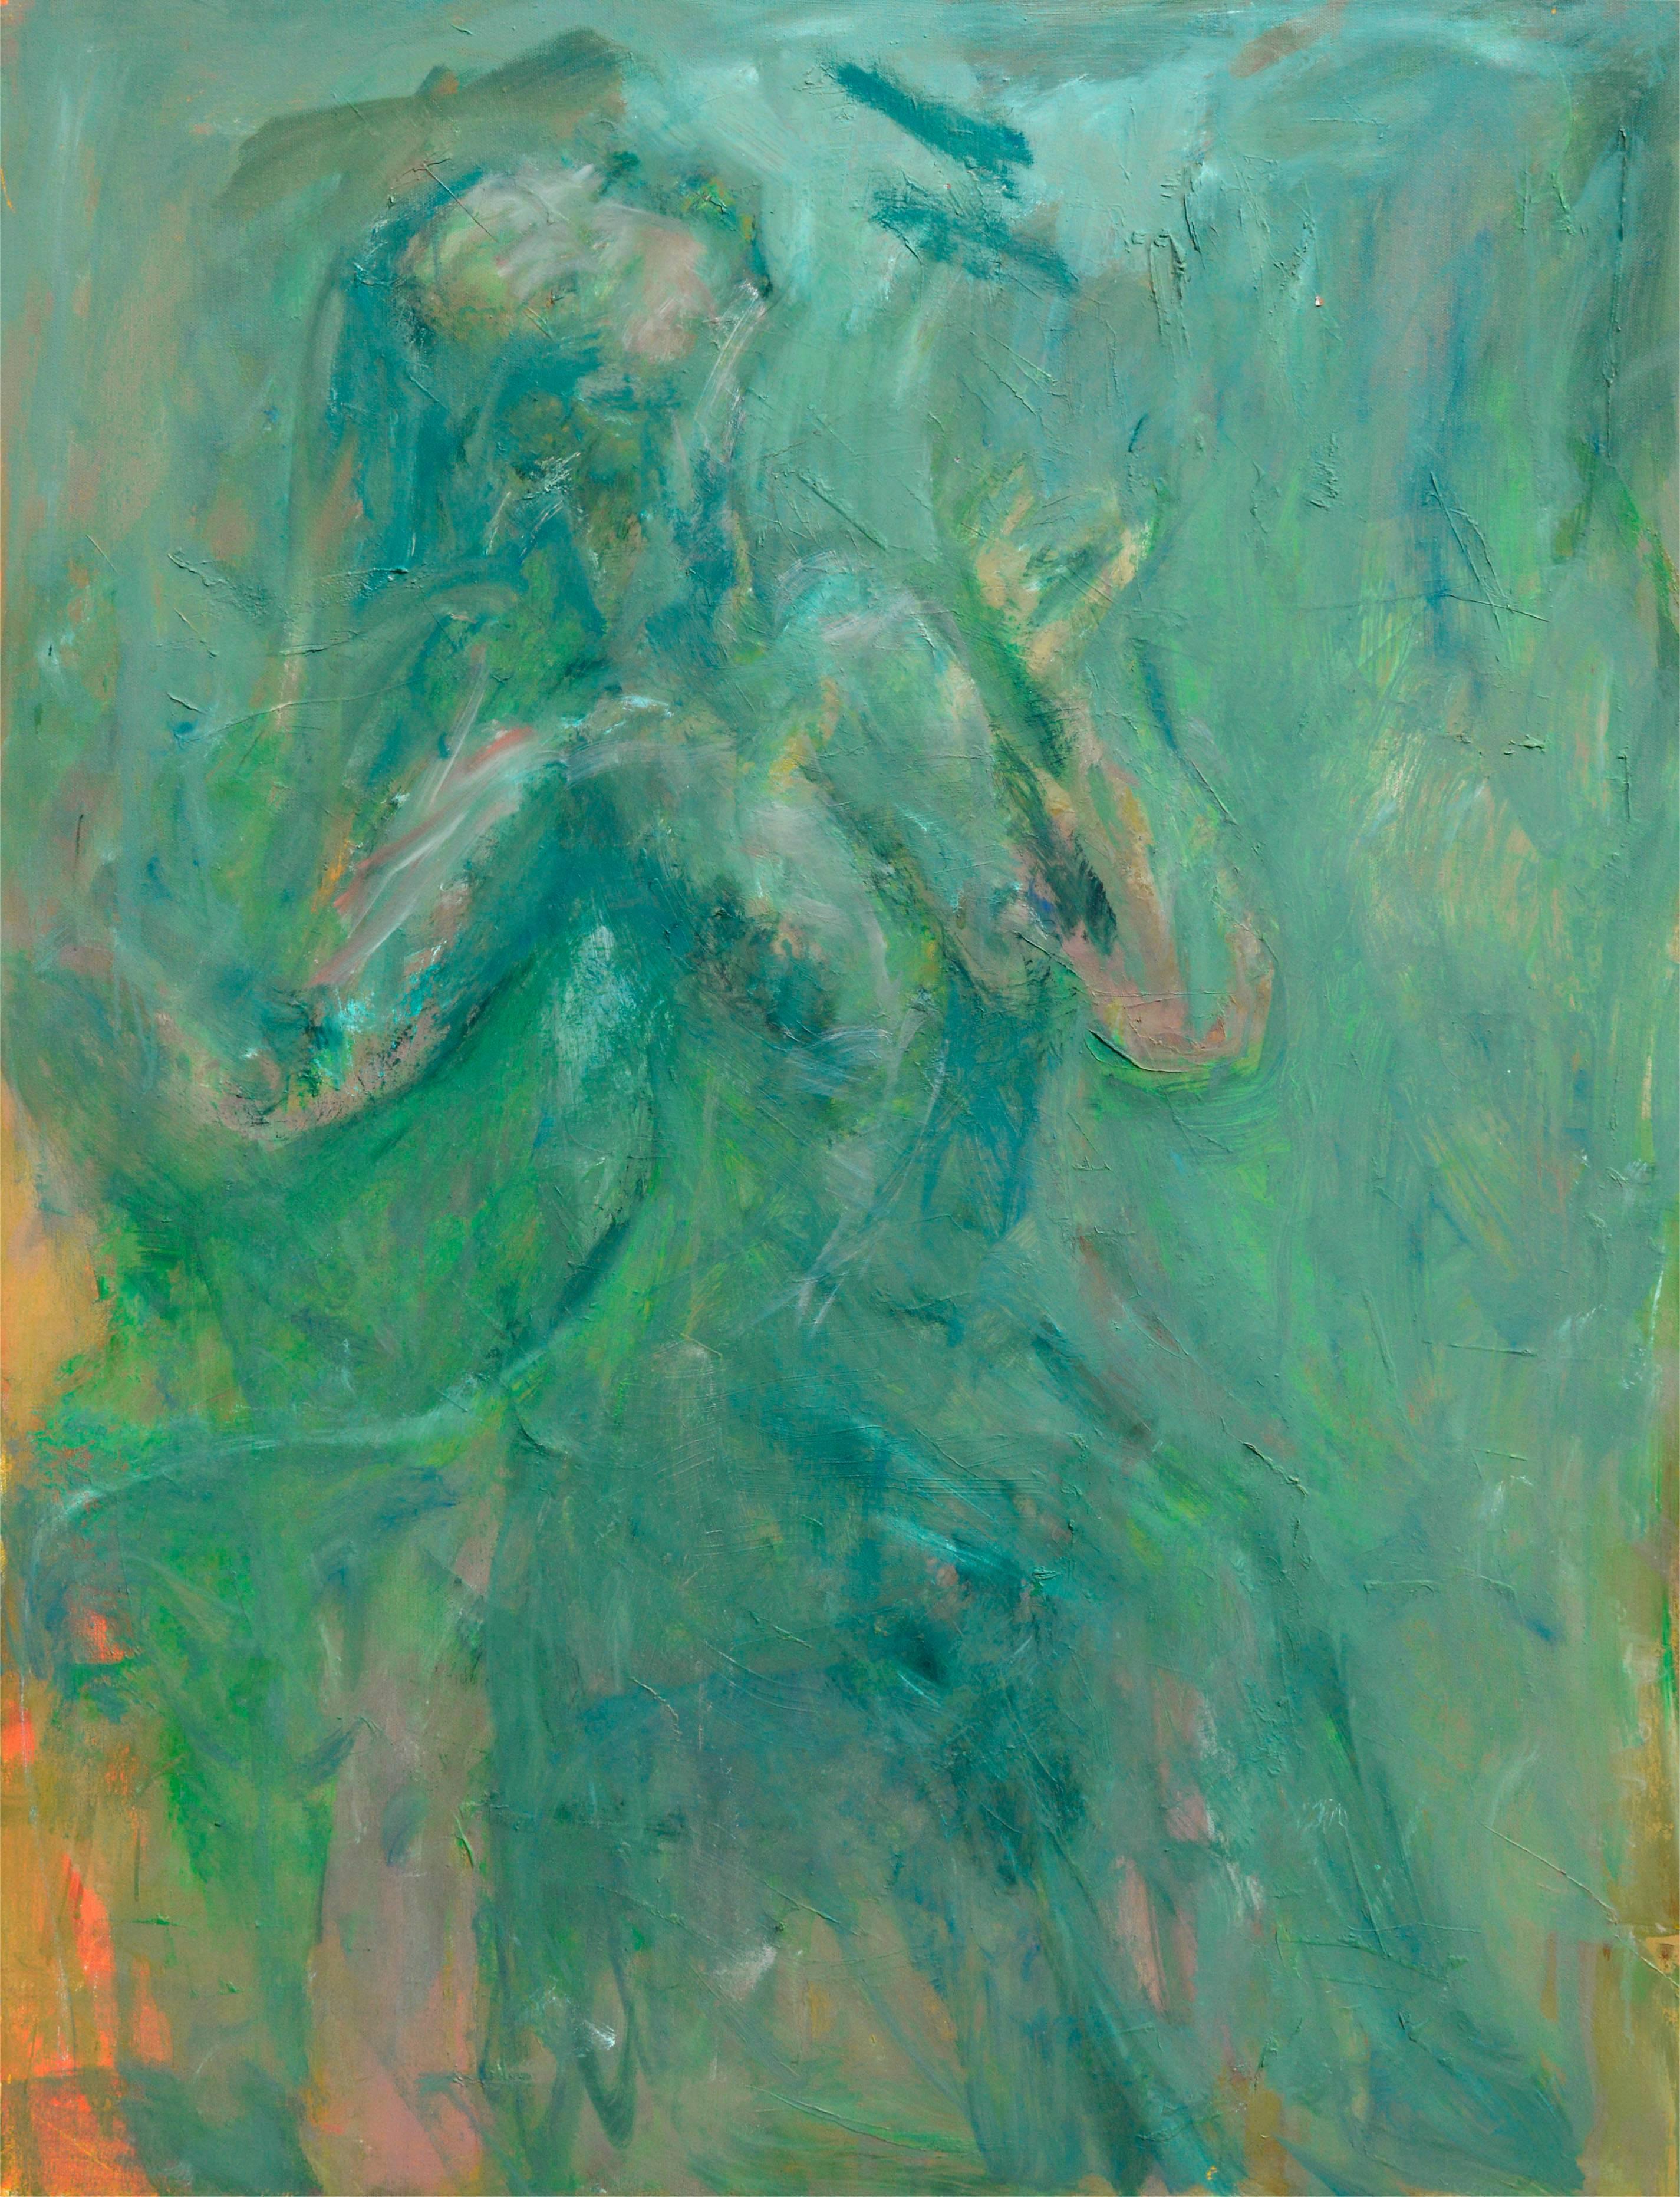 Daniel David Fuentes Figurative Painting - Teal Figurative Abstract